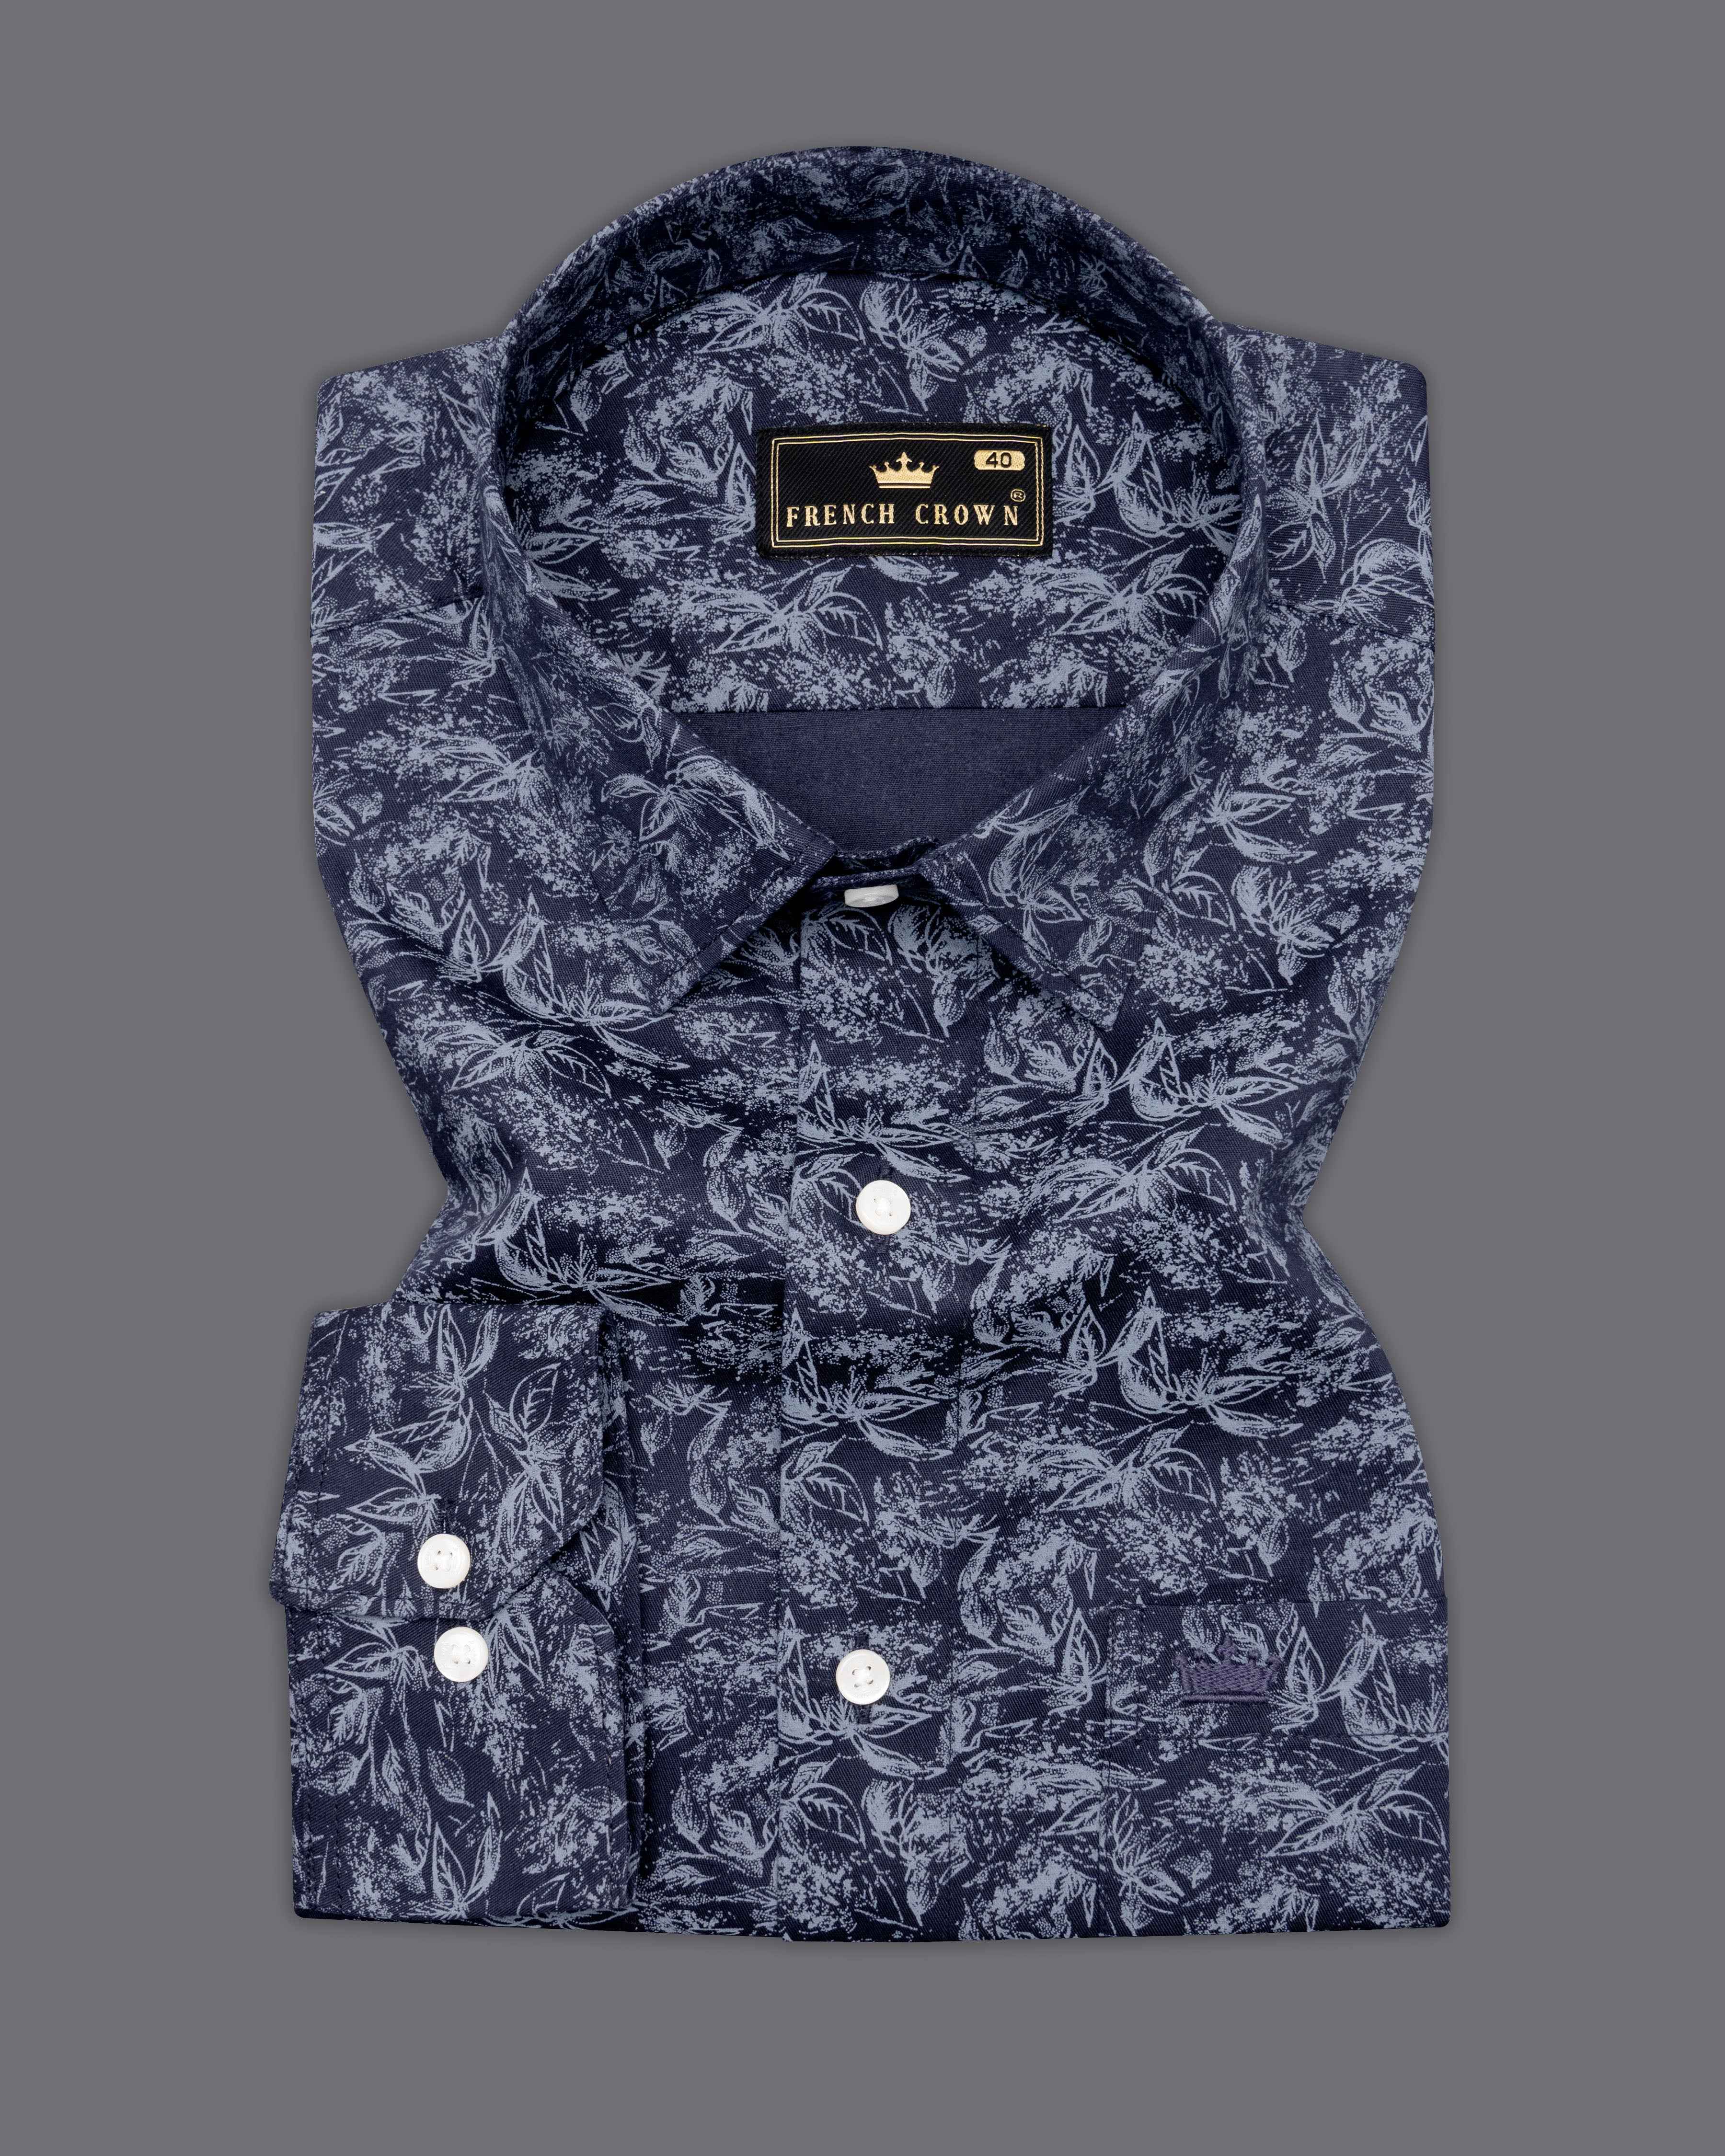 Martinique Blue with Amethyst Smoke Gray Floral Printed Twill Premium Cotton Shirt